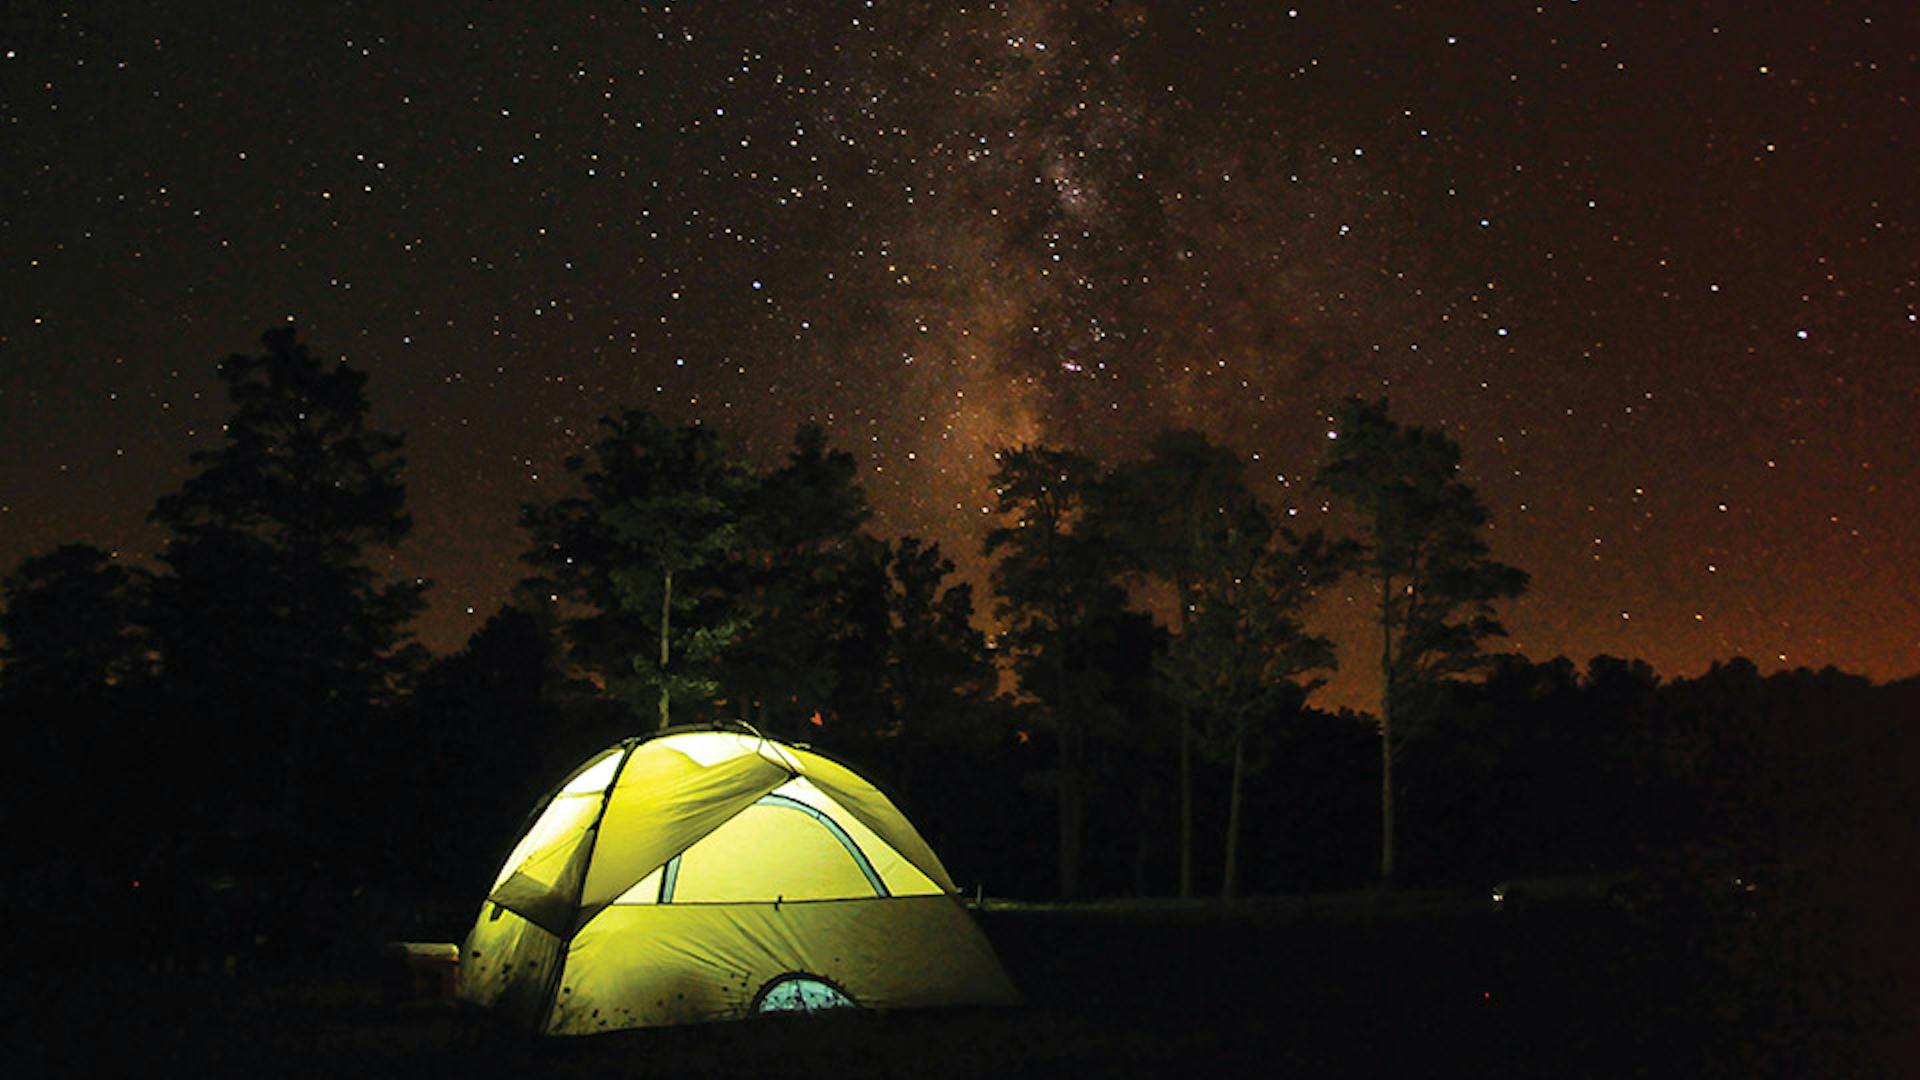 Illuminated tent at night in Cherry Springs State Park in Coudersport, Pennsylvania (photo by Pennsylvania Department of Conservation and Natural Resources)